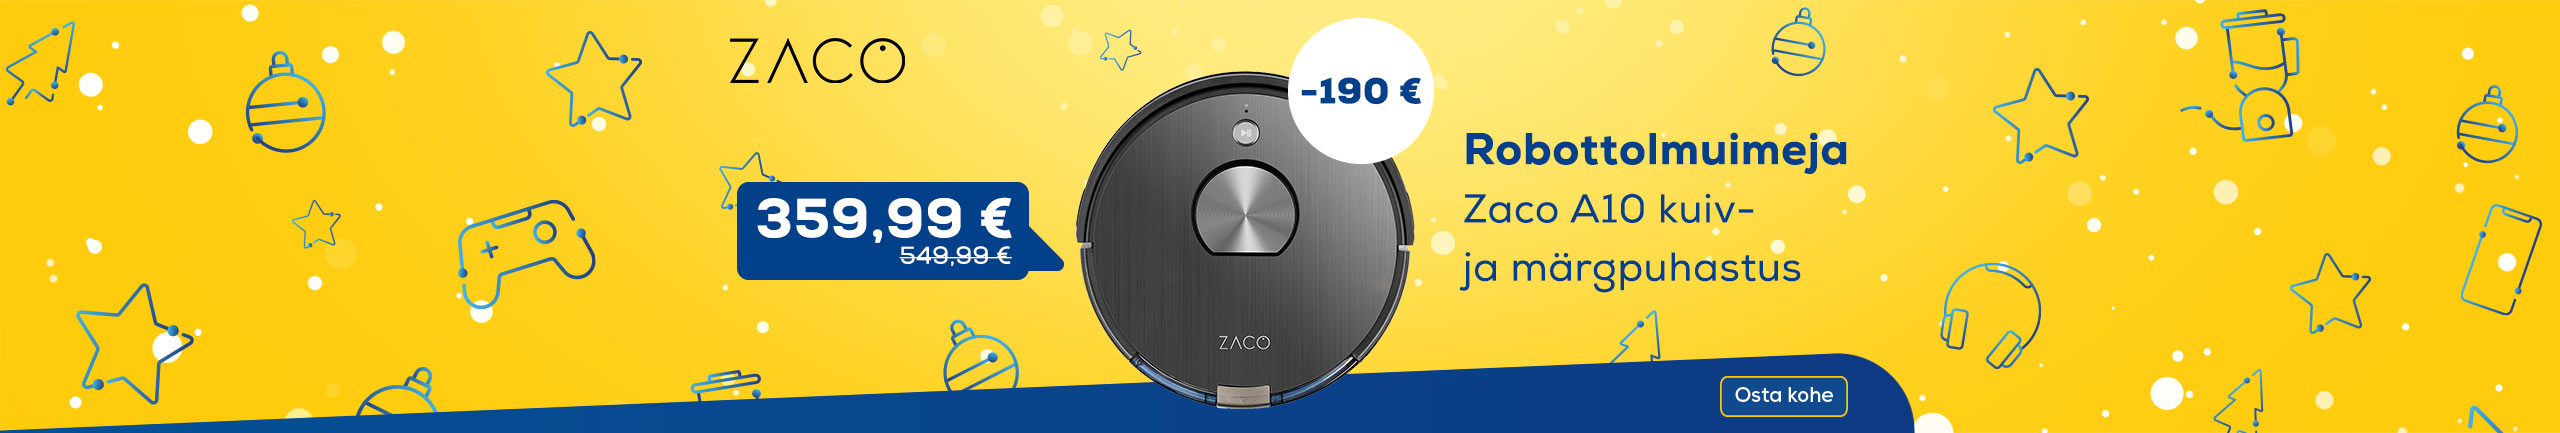 Discover Zaco robot vacuum cleaner